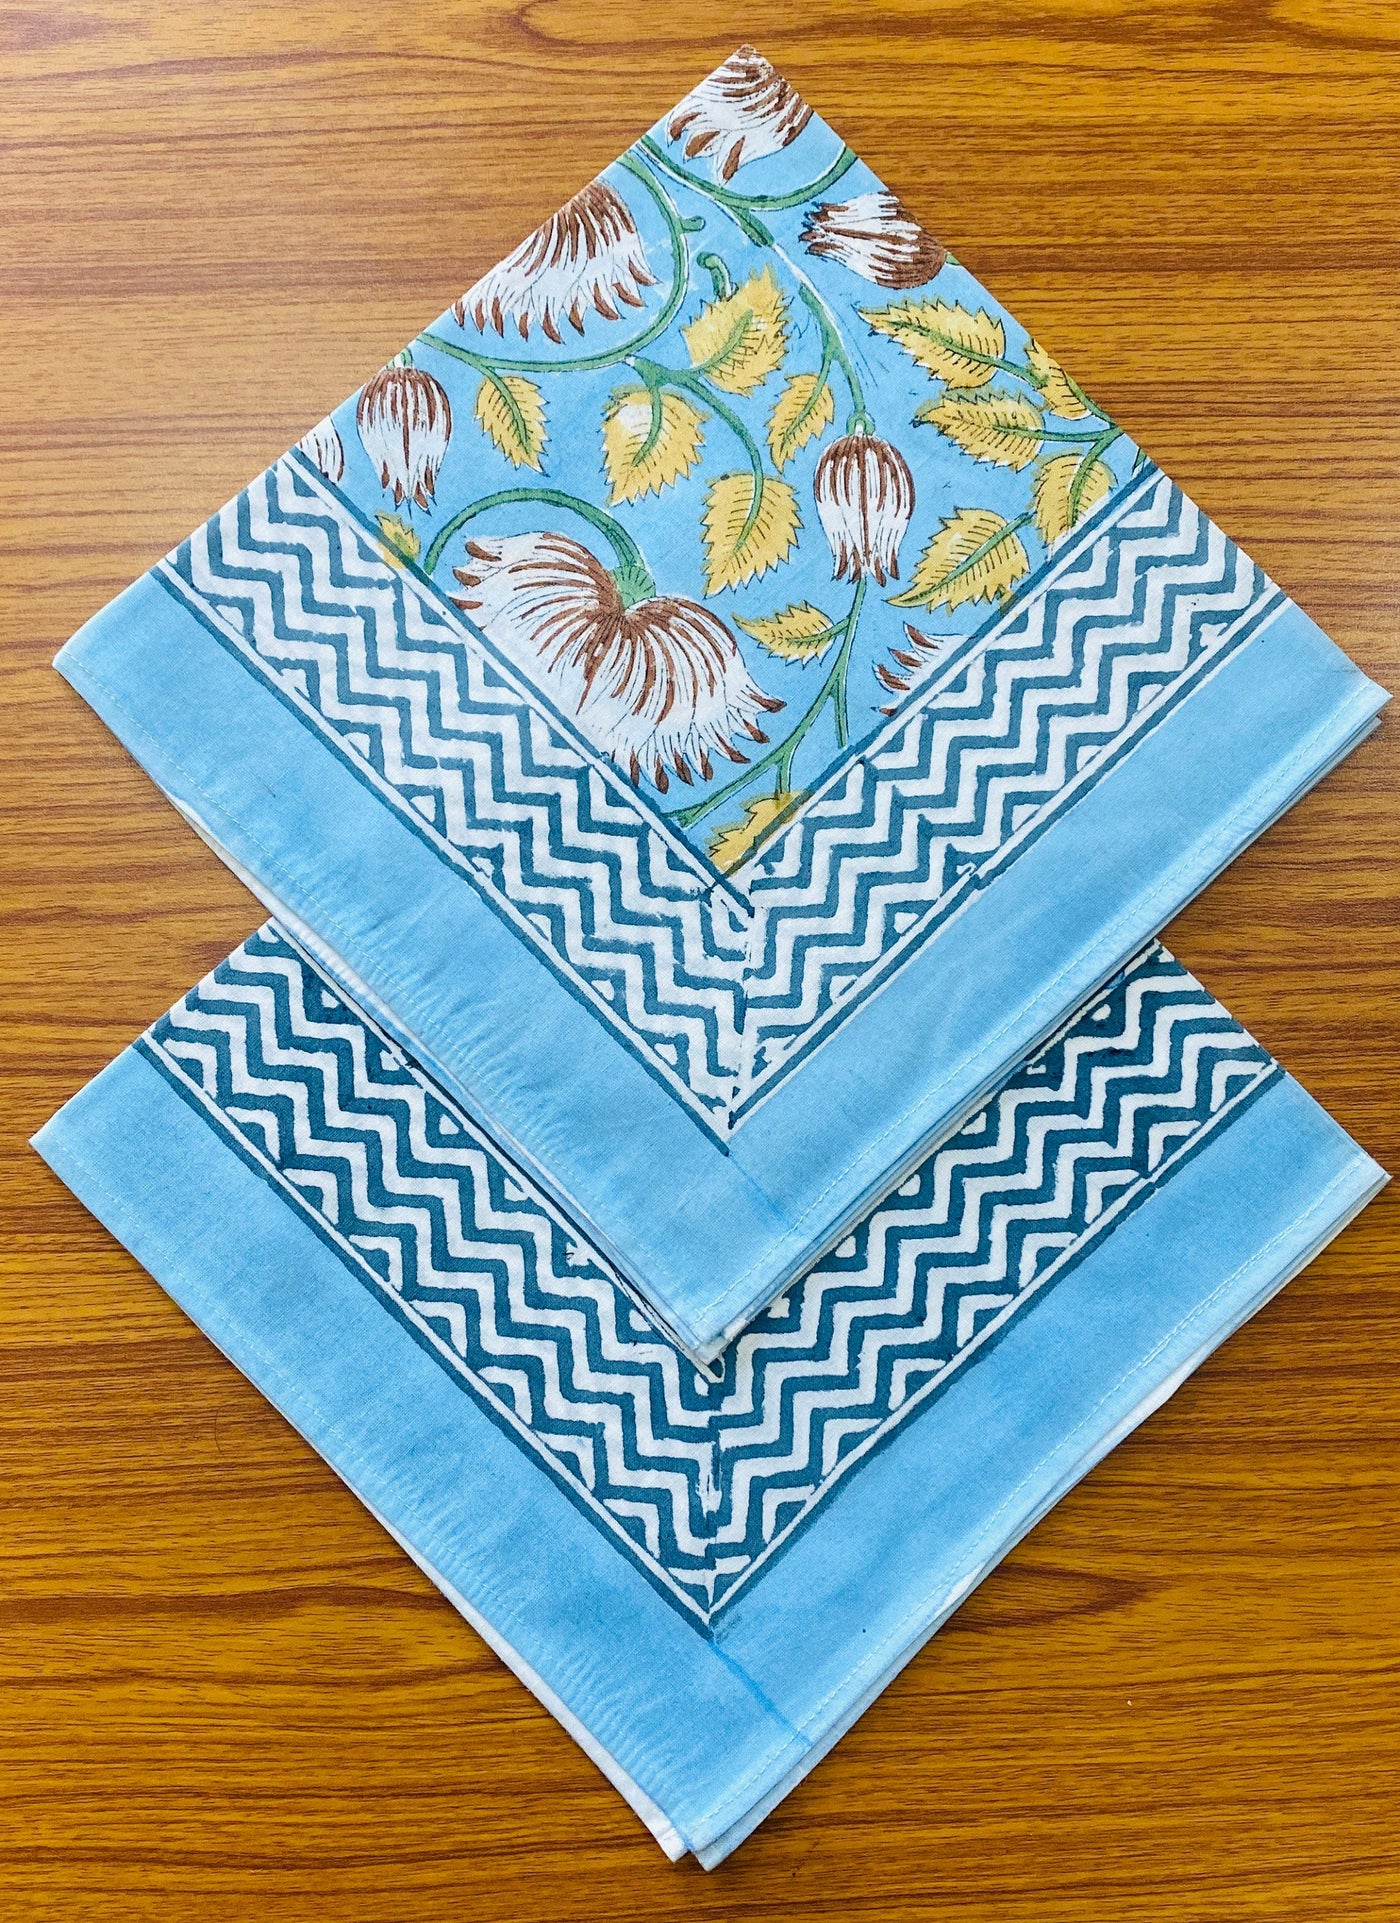 Fabricrush Airforce Blue, Goldenrod Yellow Indian Floral Hand Block Printed Cotton Cloth Napkins, Size- 20x20" -Dinner Napkins, Farmhouse Picnic Party